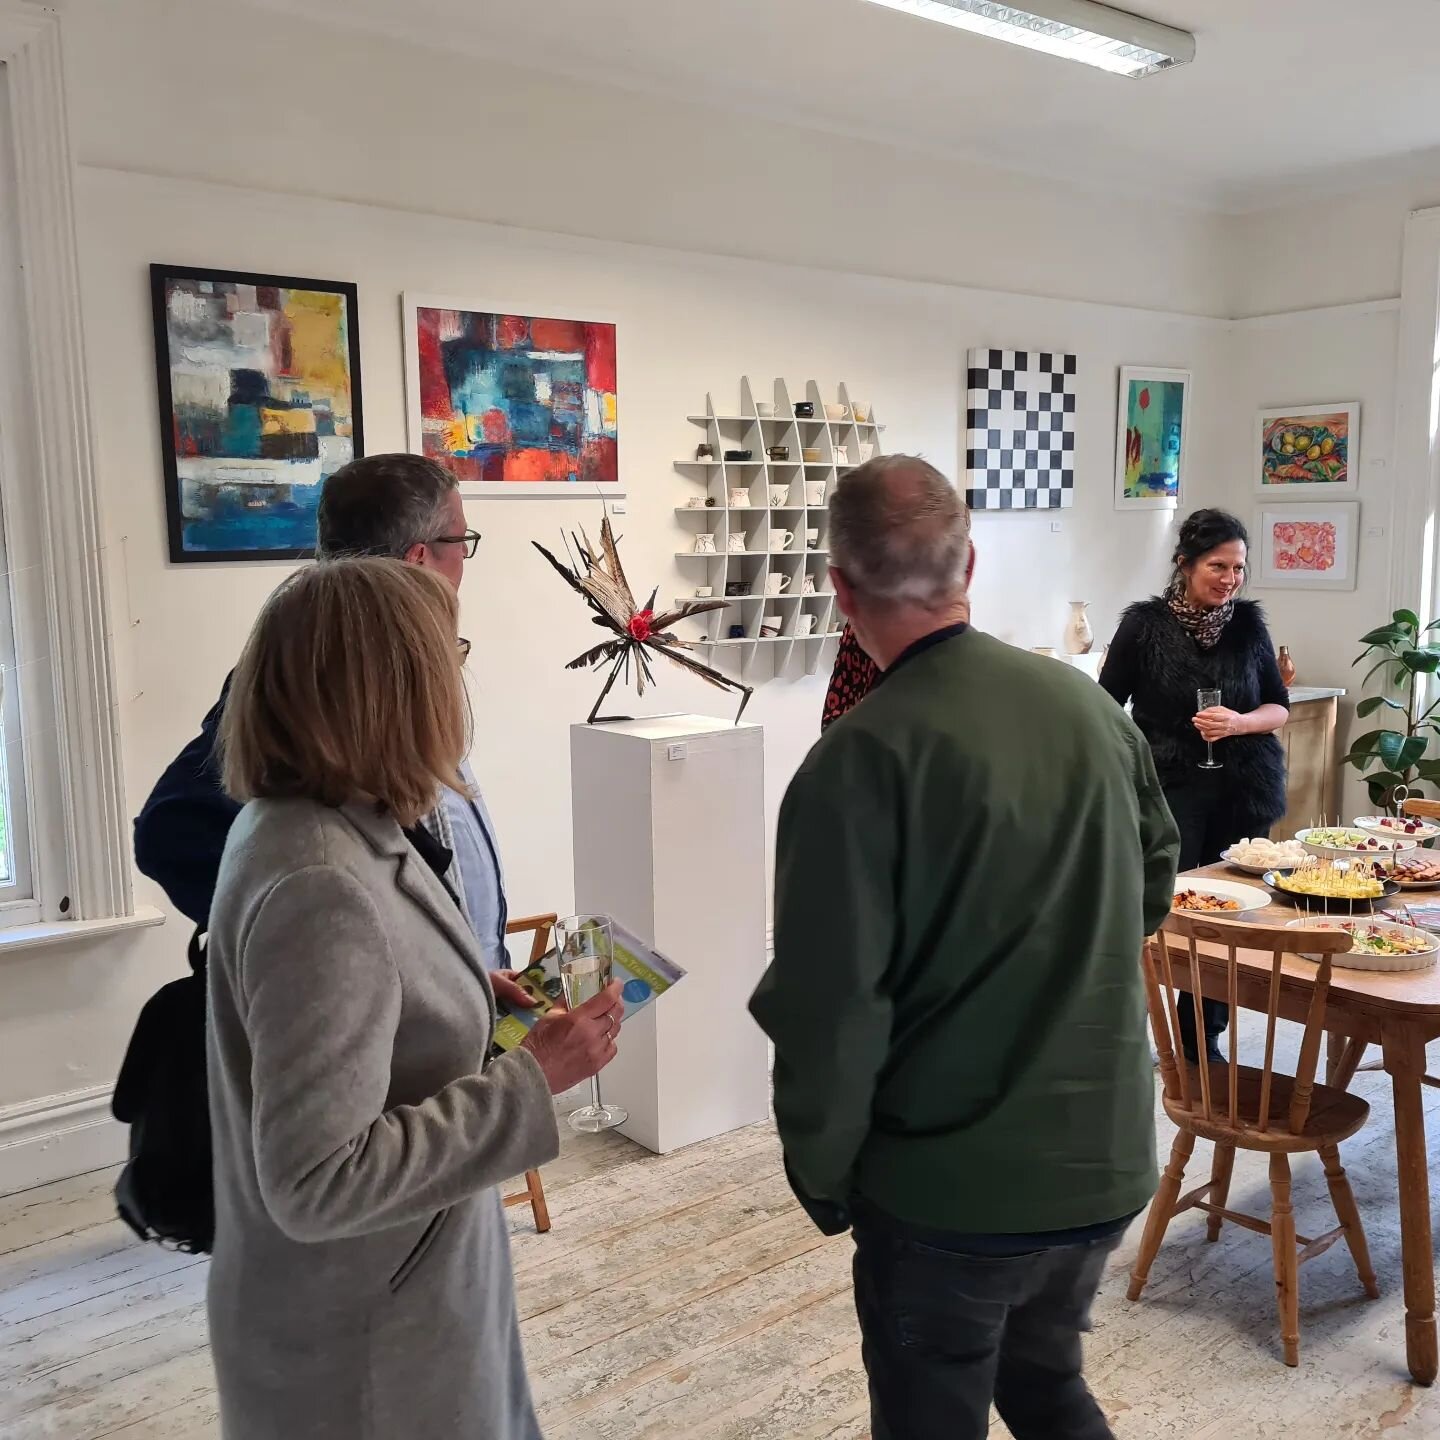 We are open now! Pop down for drinks and nibbles!

#privateview #oxfordshireartweeks #wallingfordareaartweeks #openstudios #wallingford #Oxfordshire #exhibition #creativecommunity